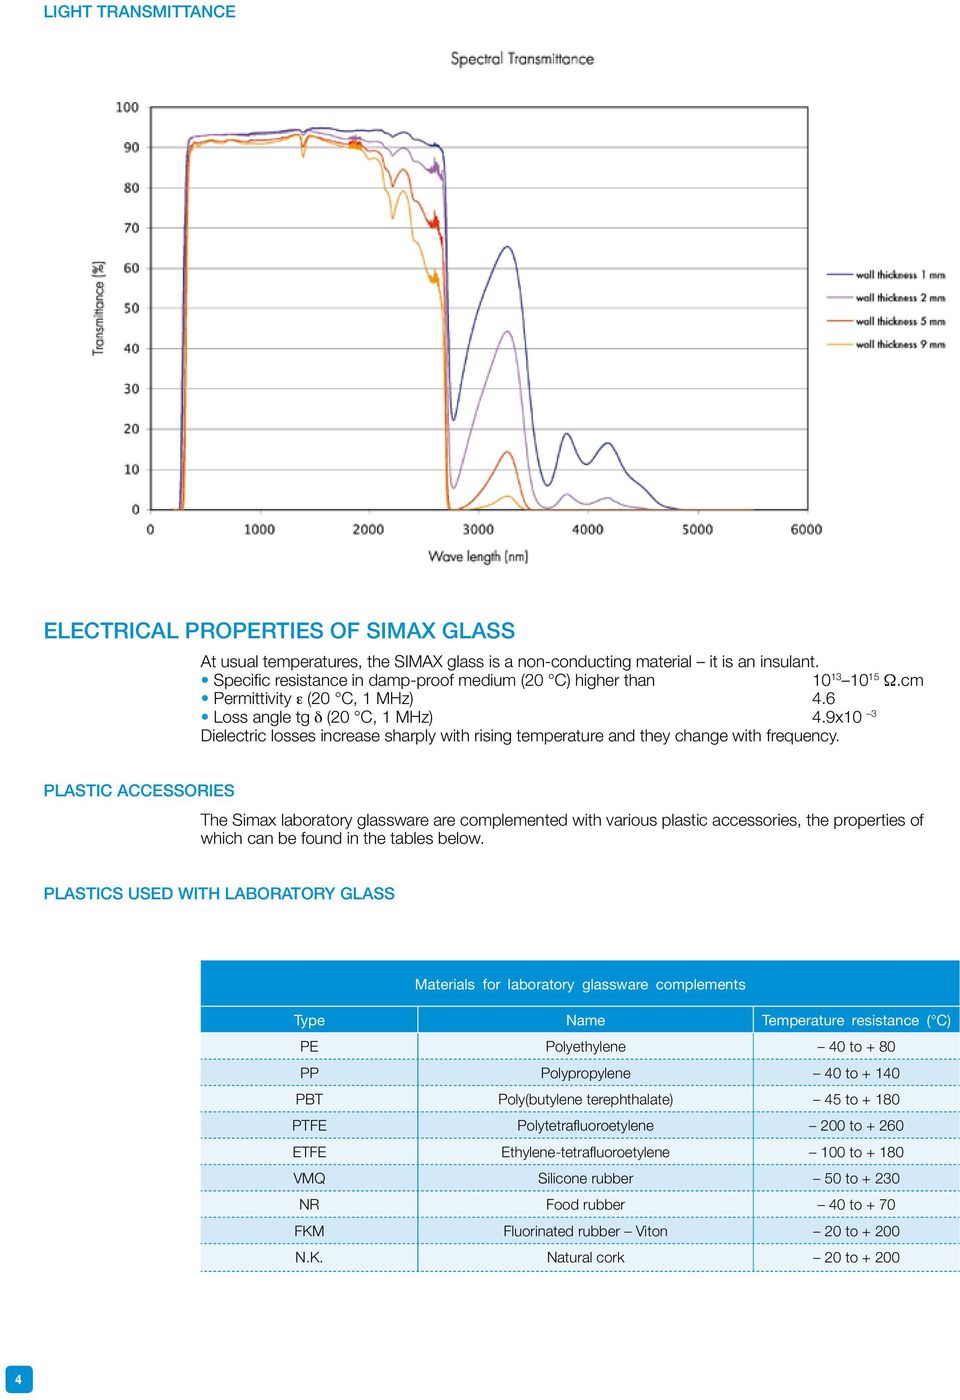 9x10 3 Dielectric losses increase sharply with rising temperature and they change with frequency.